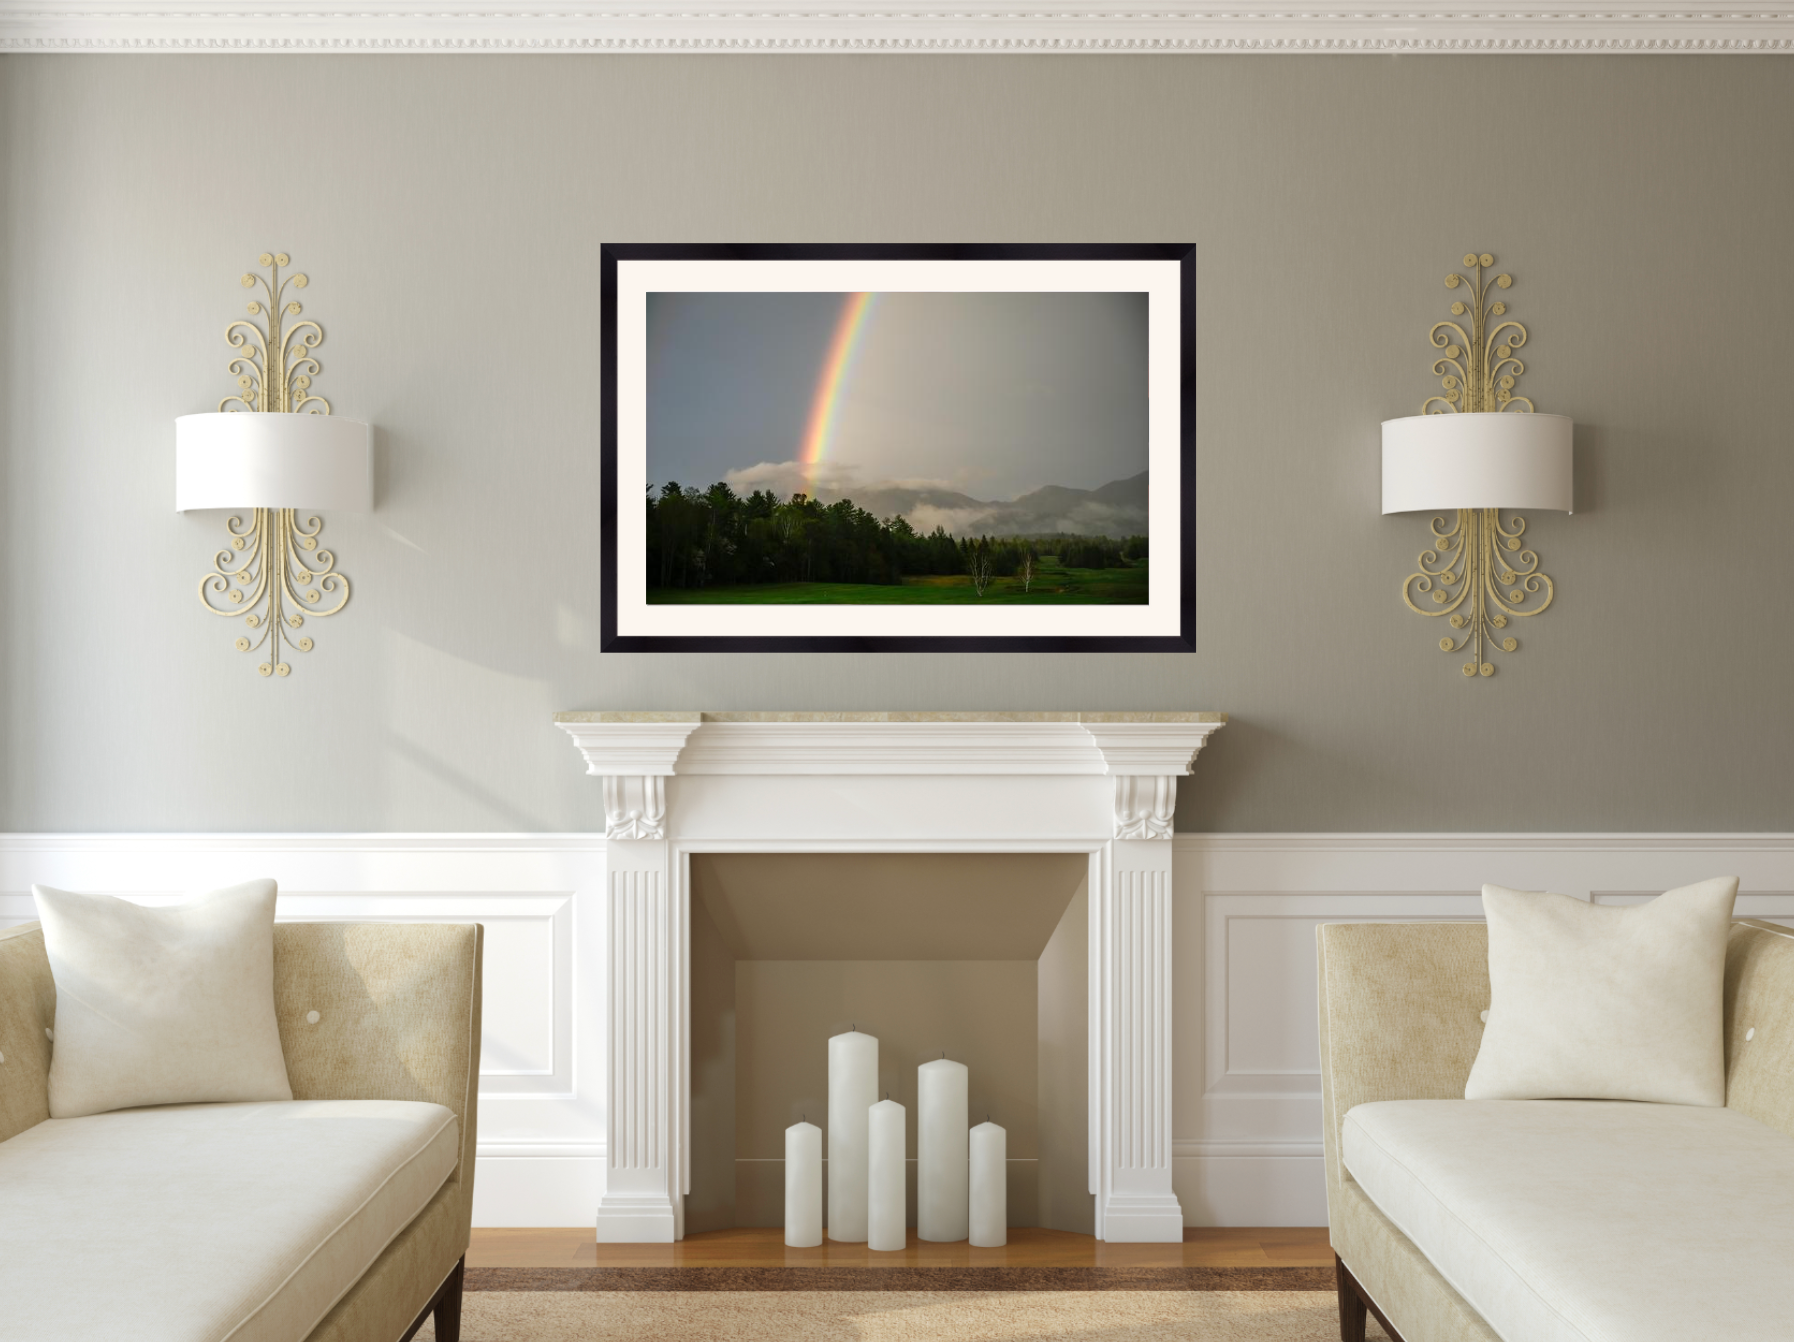 print of a rainbow in the adirondack mountains